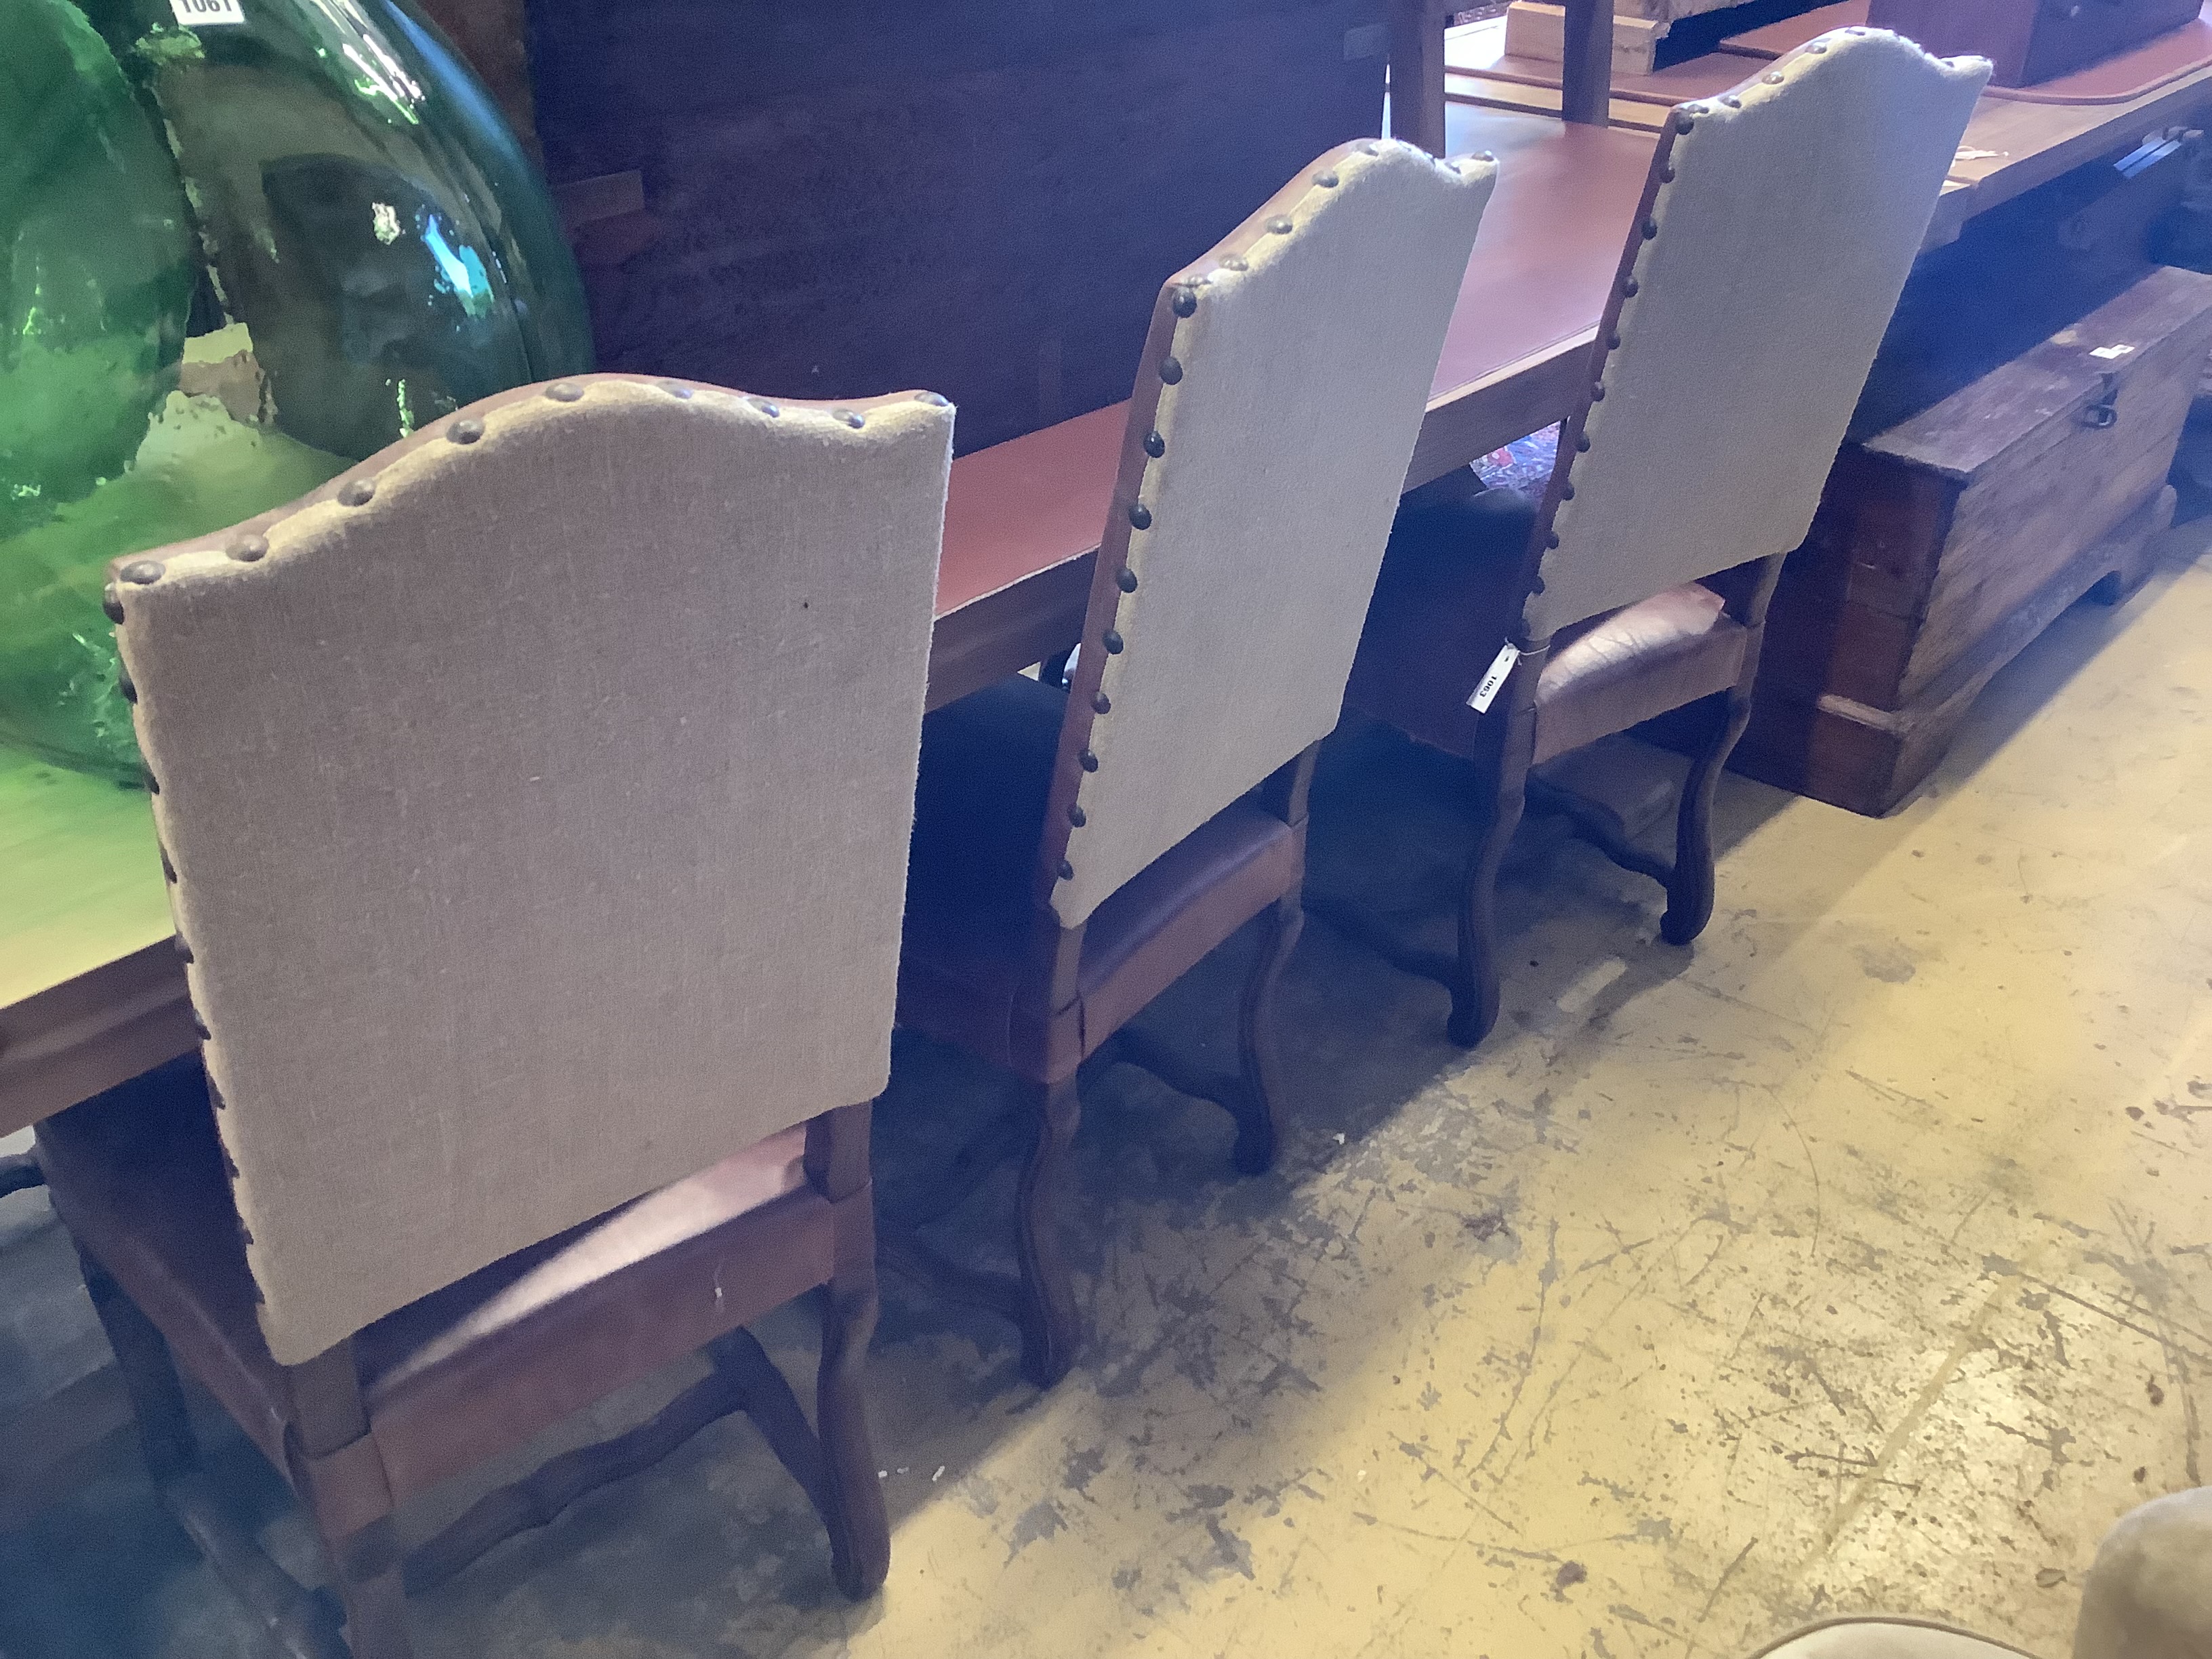 A set of six French leather high back dining chairs